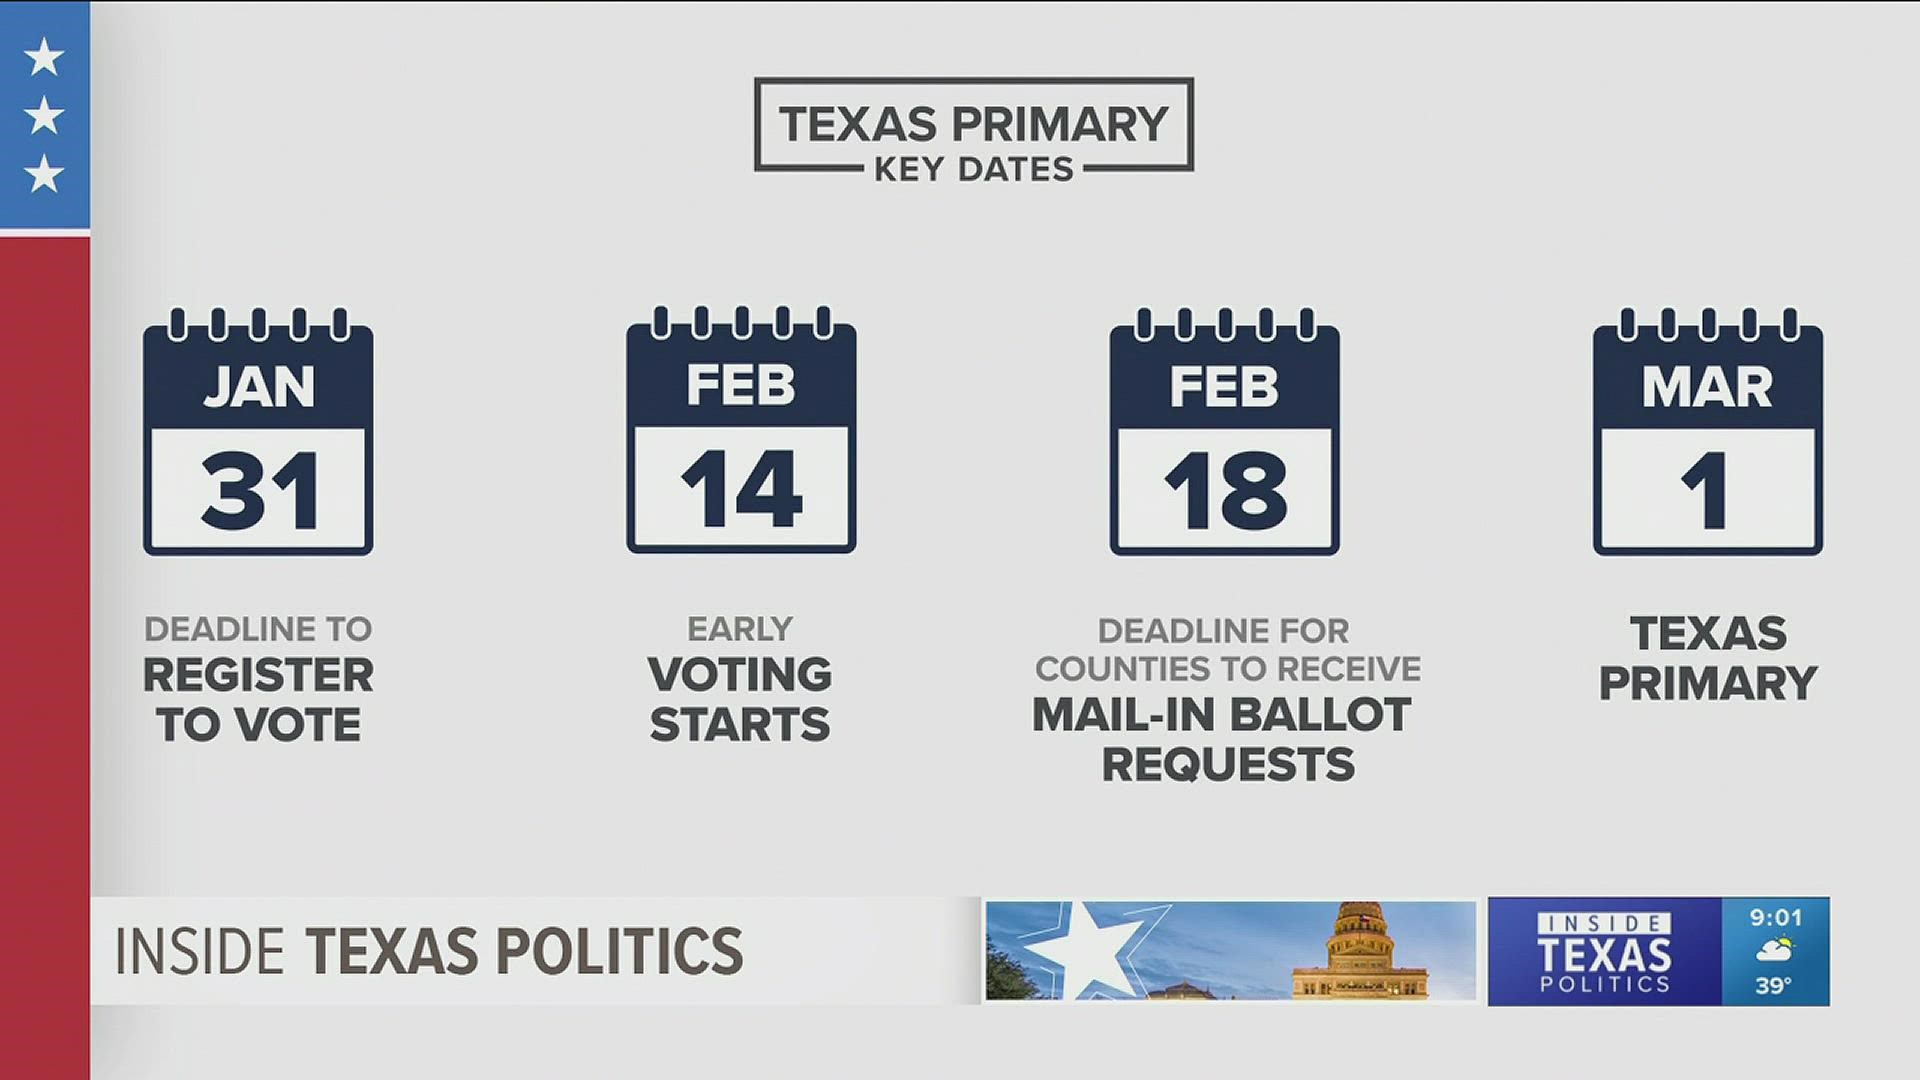 Texas Election Calendar 2022 2022 Texas Primary Elections: Why Voter Turnout Matters | Wfaa.com